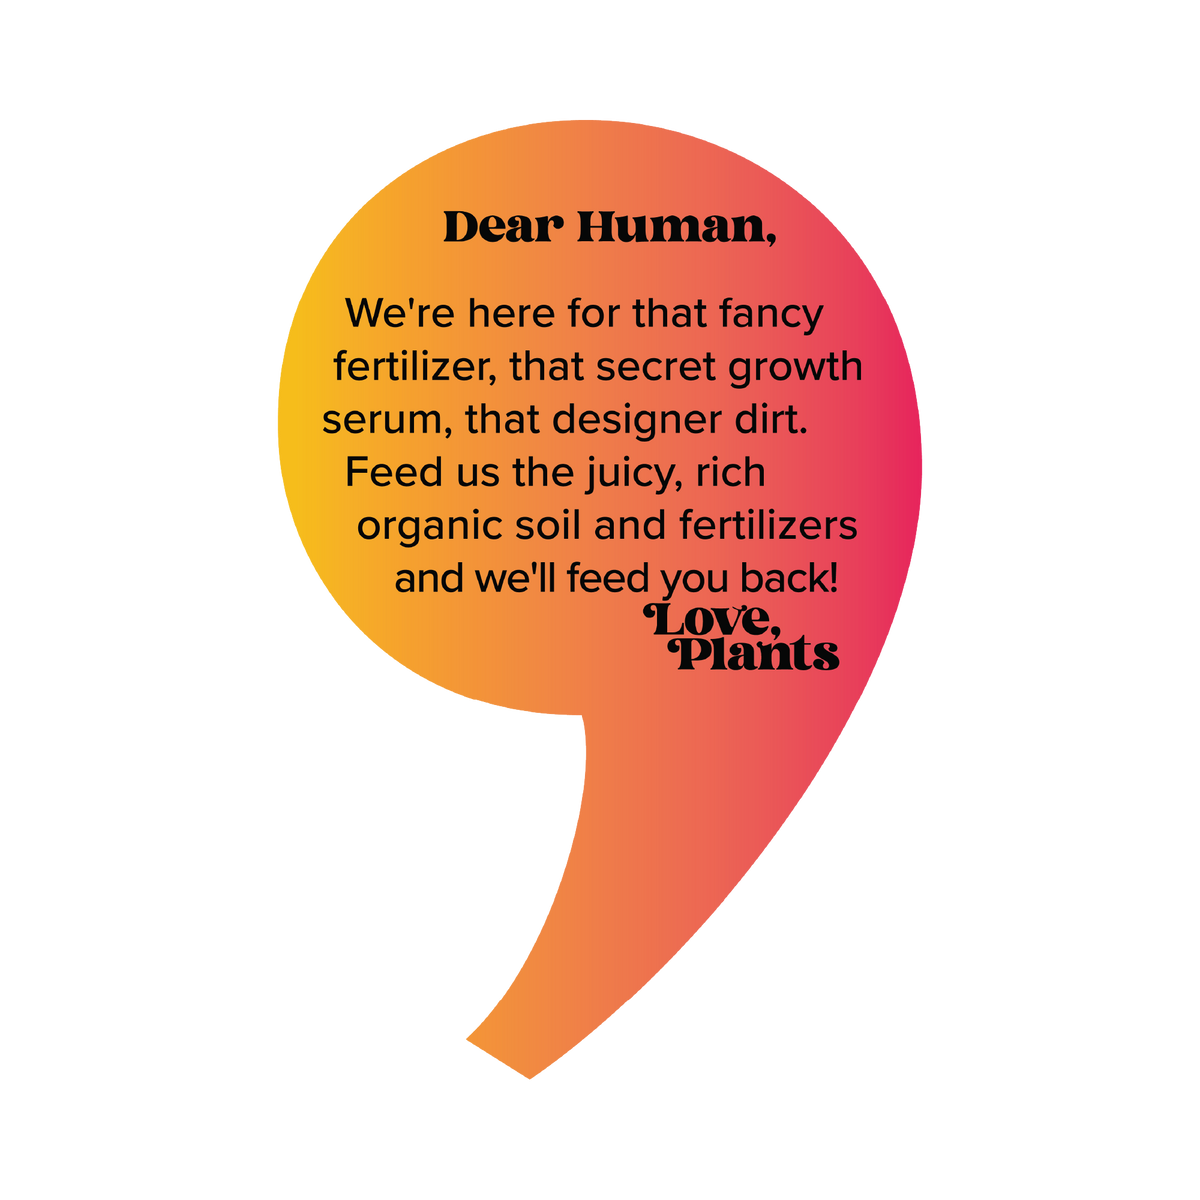 Dear Human, We&#39;re here for that fancy fertilizer, that secret growth serum, that designer dirt. Feed us the juicy, rich organic soil and fertilizers and we&#39;ll feed you back! Love, Plants